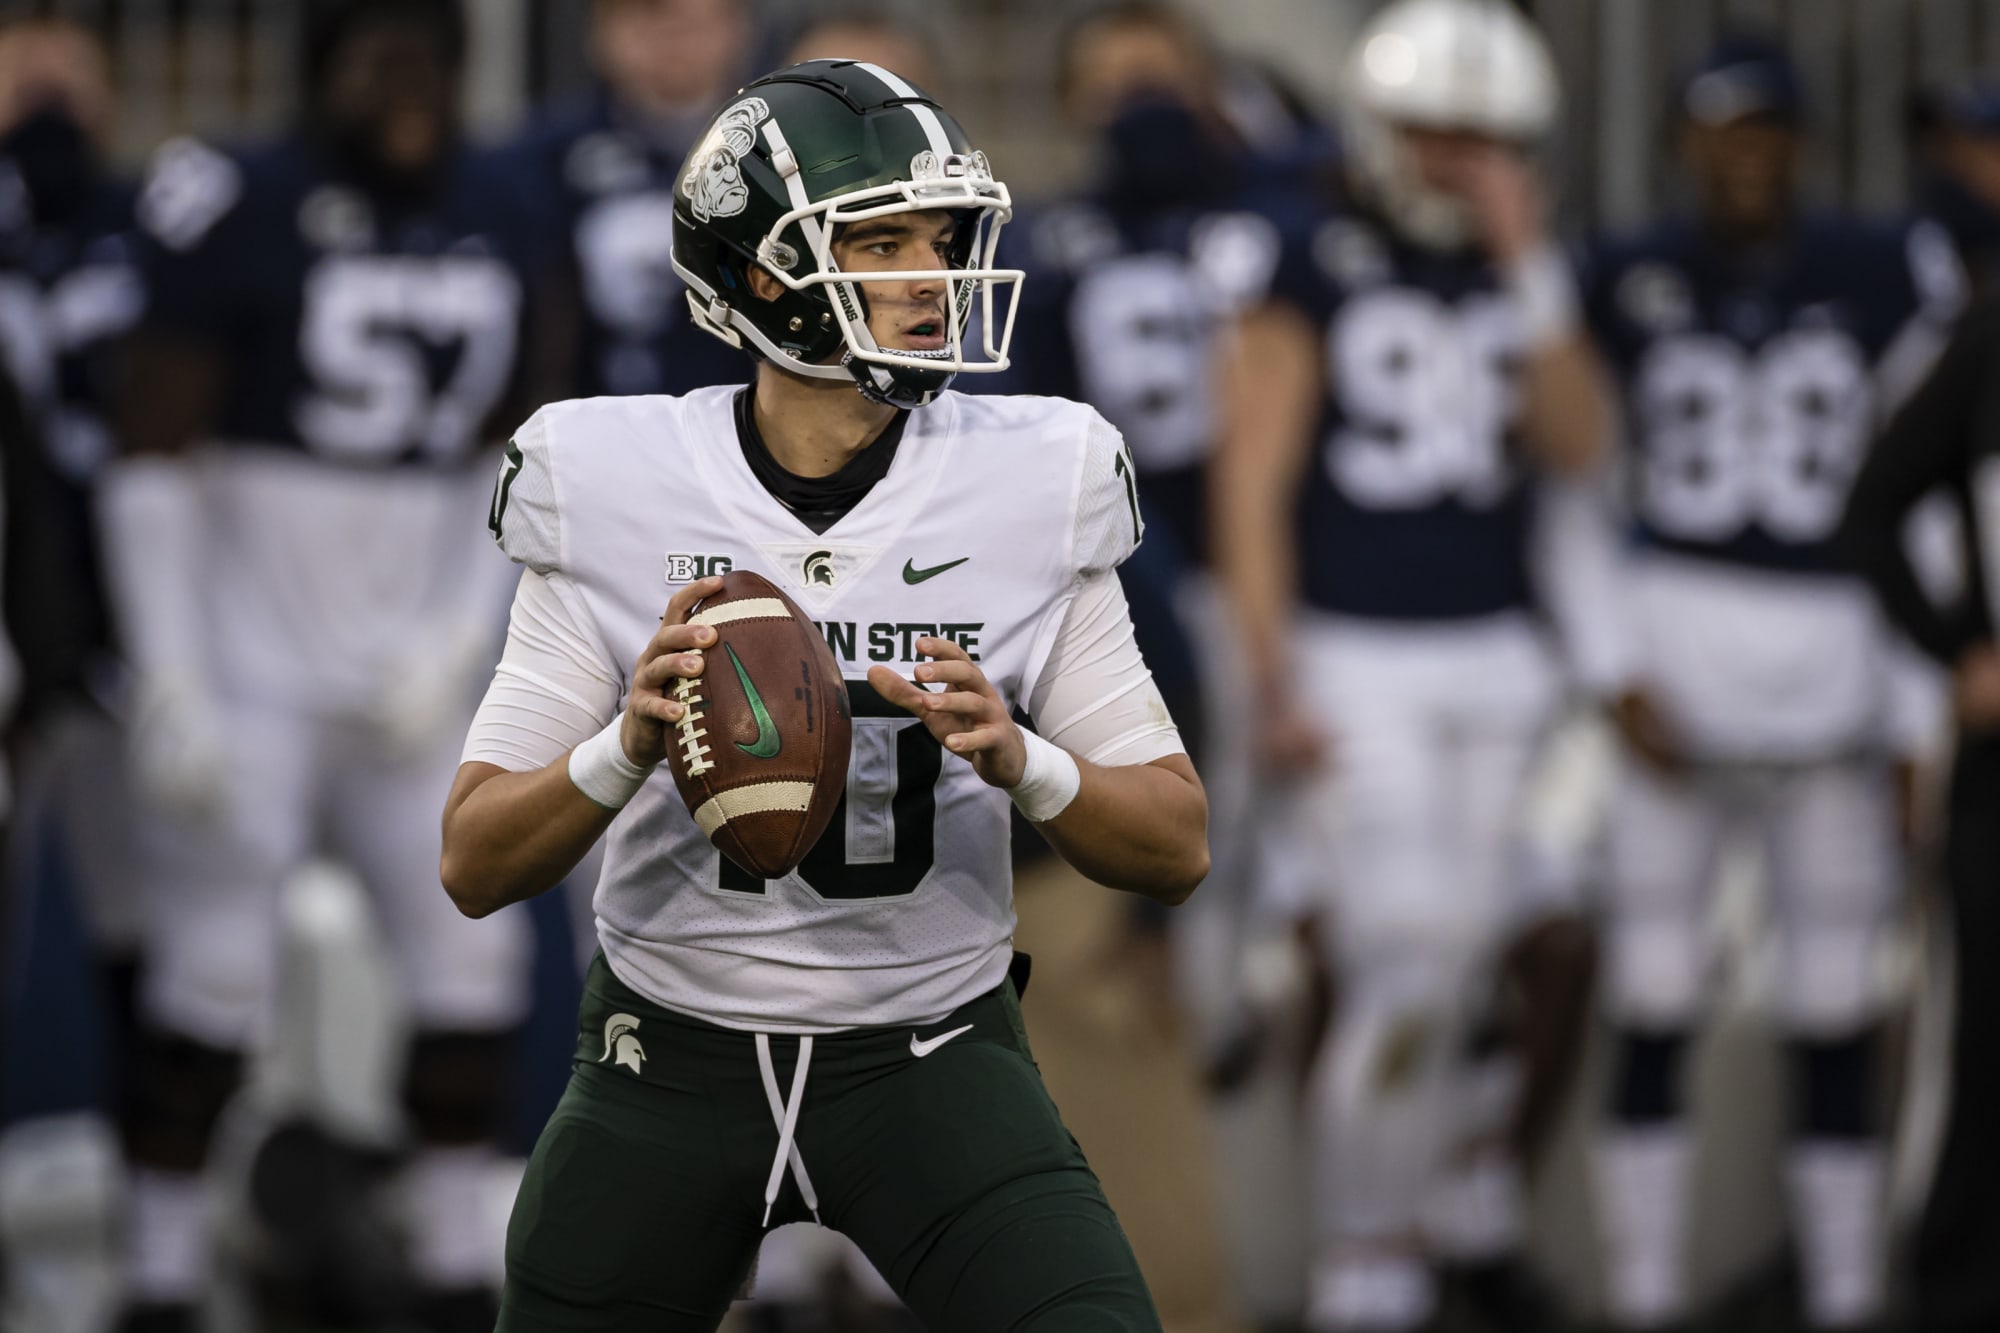 Michigan State football Waytooearly depth chart projection for 2021